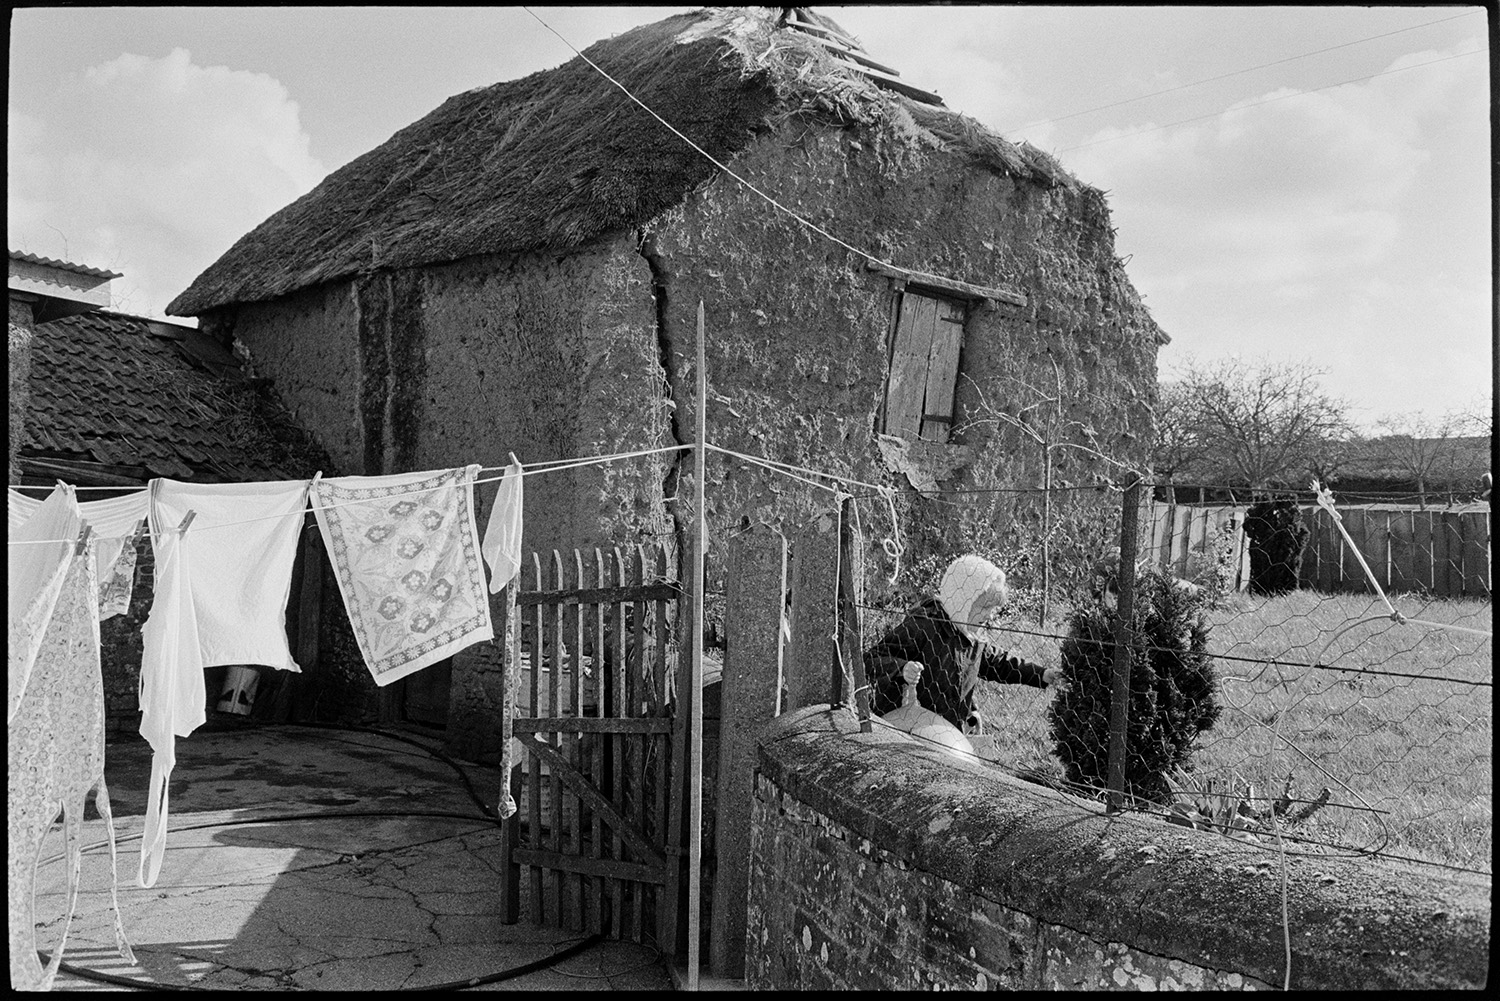 Cob and thatch barn, collapsing. 
[A collapsing cob and thatch barn with a tallet at Higher House Farm, Atherington. The barn wall has a large crack in it. A girl is playing with a space hopper in the garden next to the barn and washing is hanging out to dry on a washing line in the foreground.]